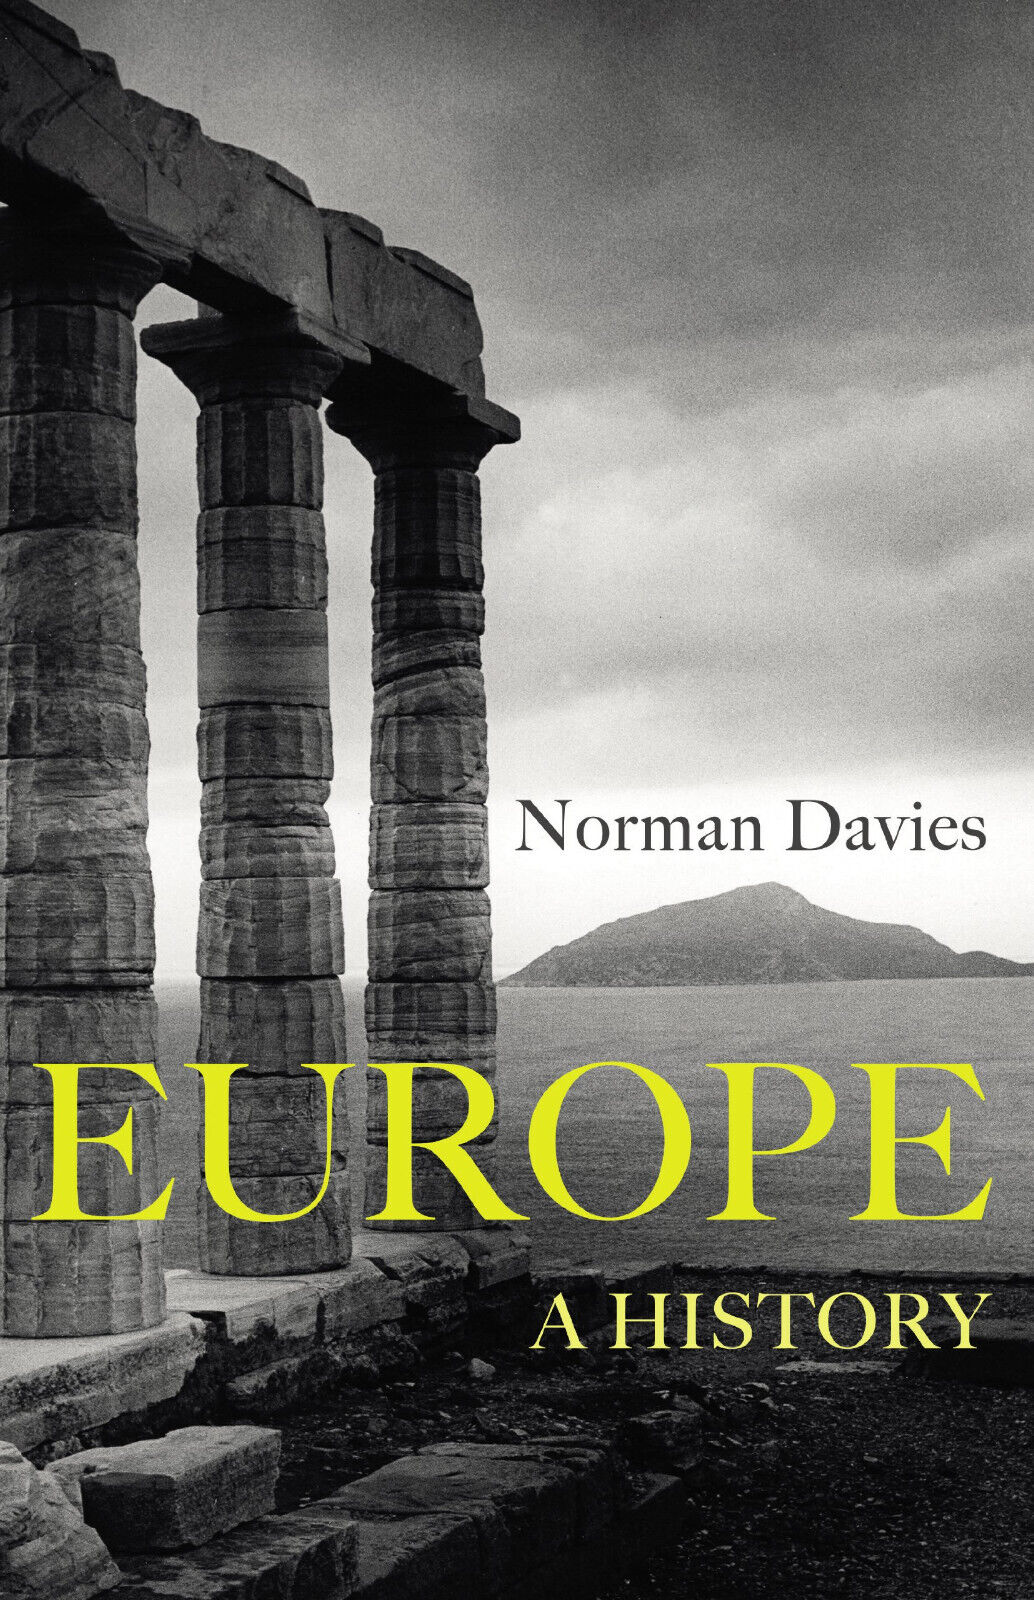 Europe. A history - Norman Davies - Vintage Publishing, 2017